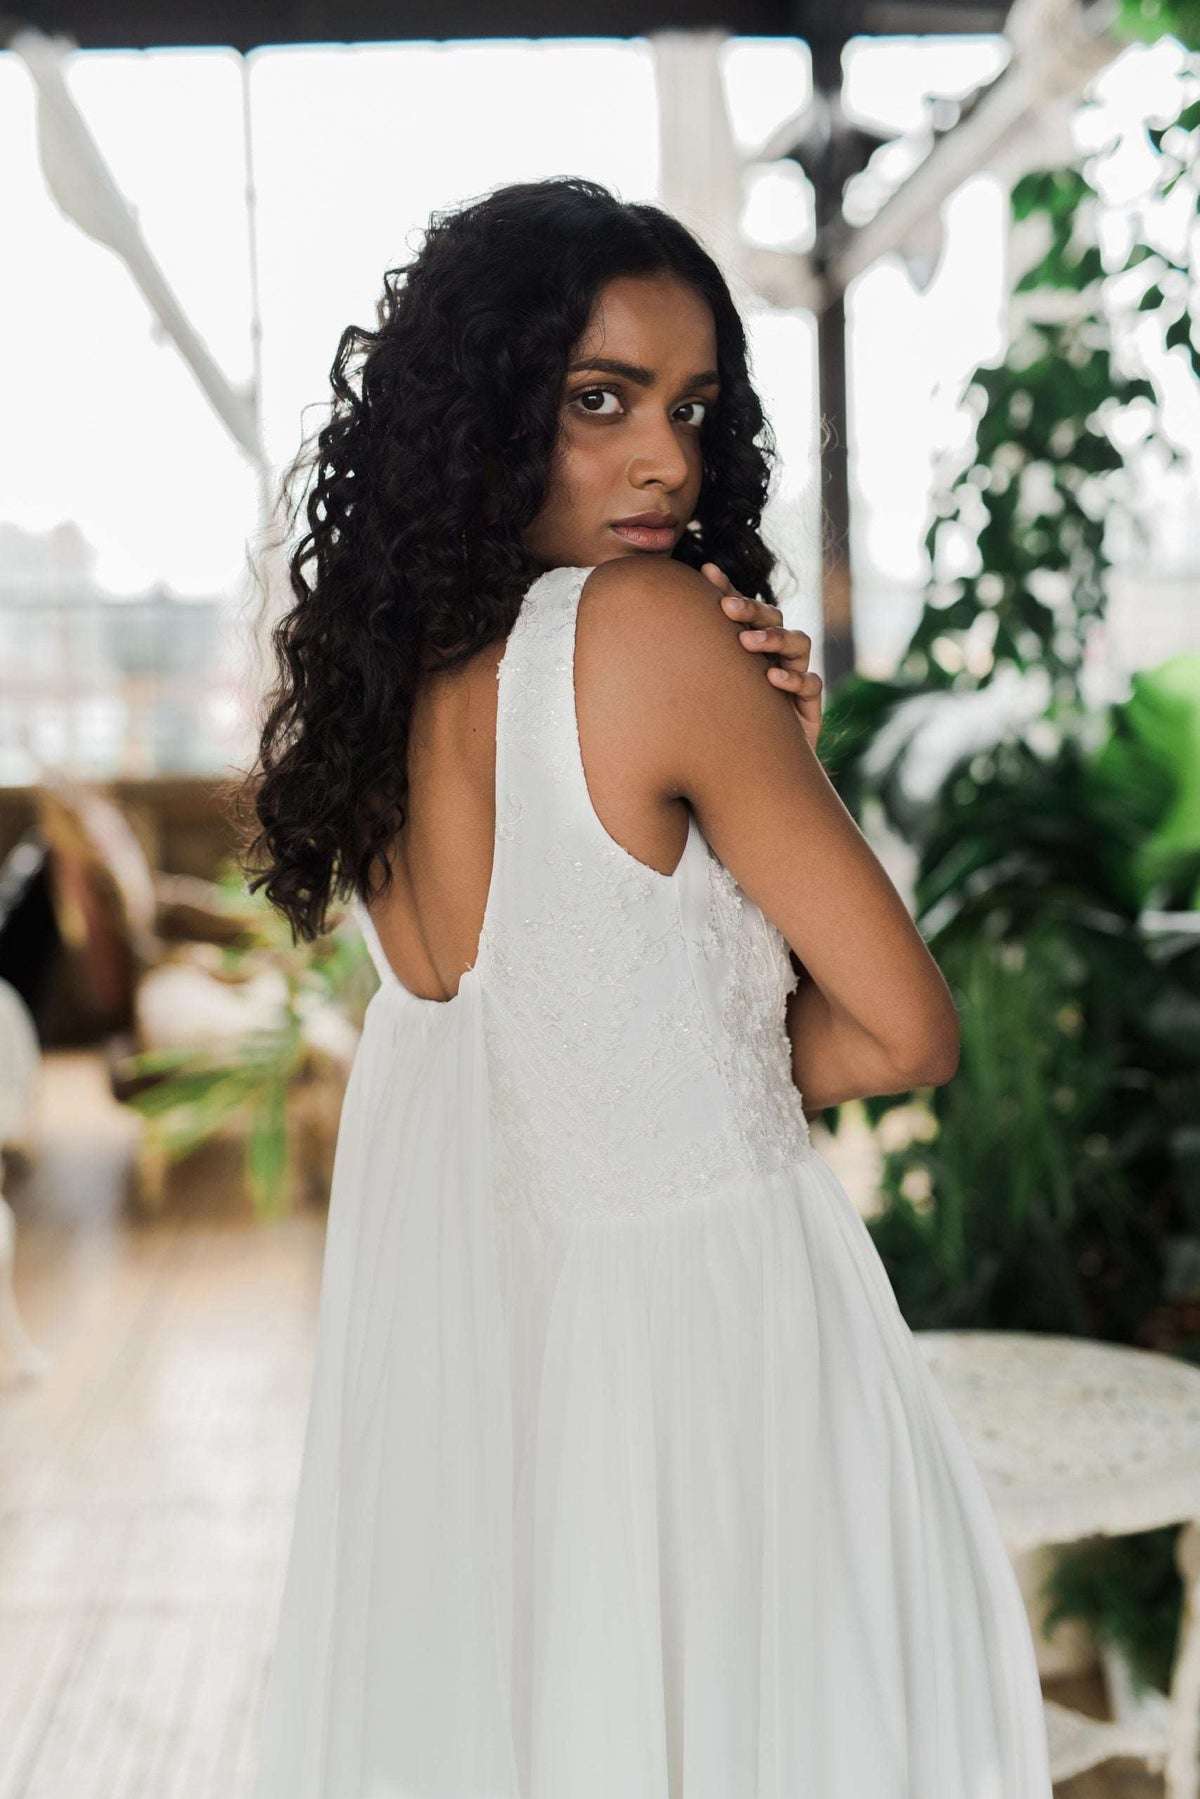 Floaty chiffon and silk wedding dress with a beaded top by Catherine Langlois. Made to order in Toronto, Ontario, Canada. Photo by Whitney Heard.